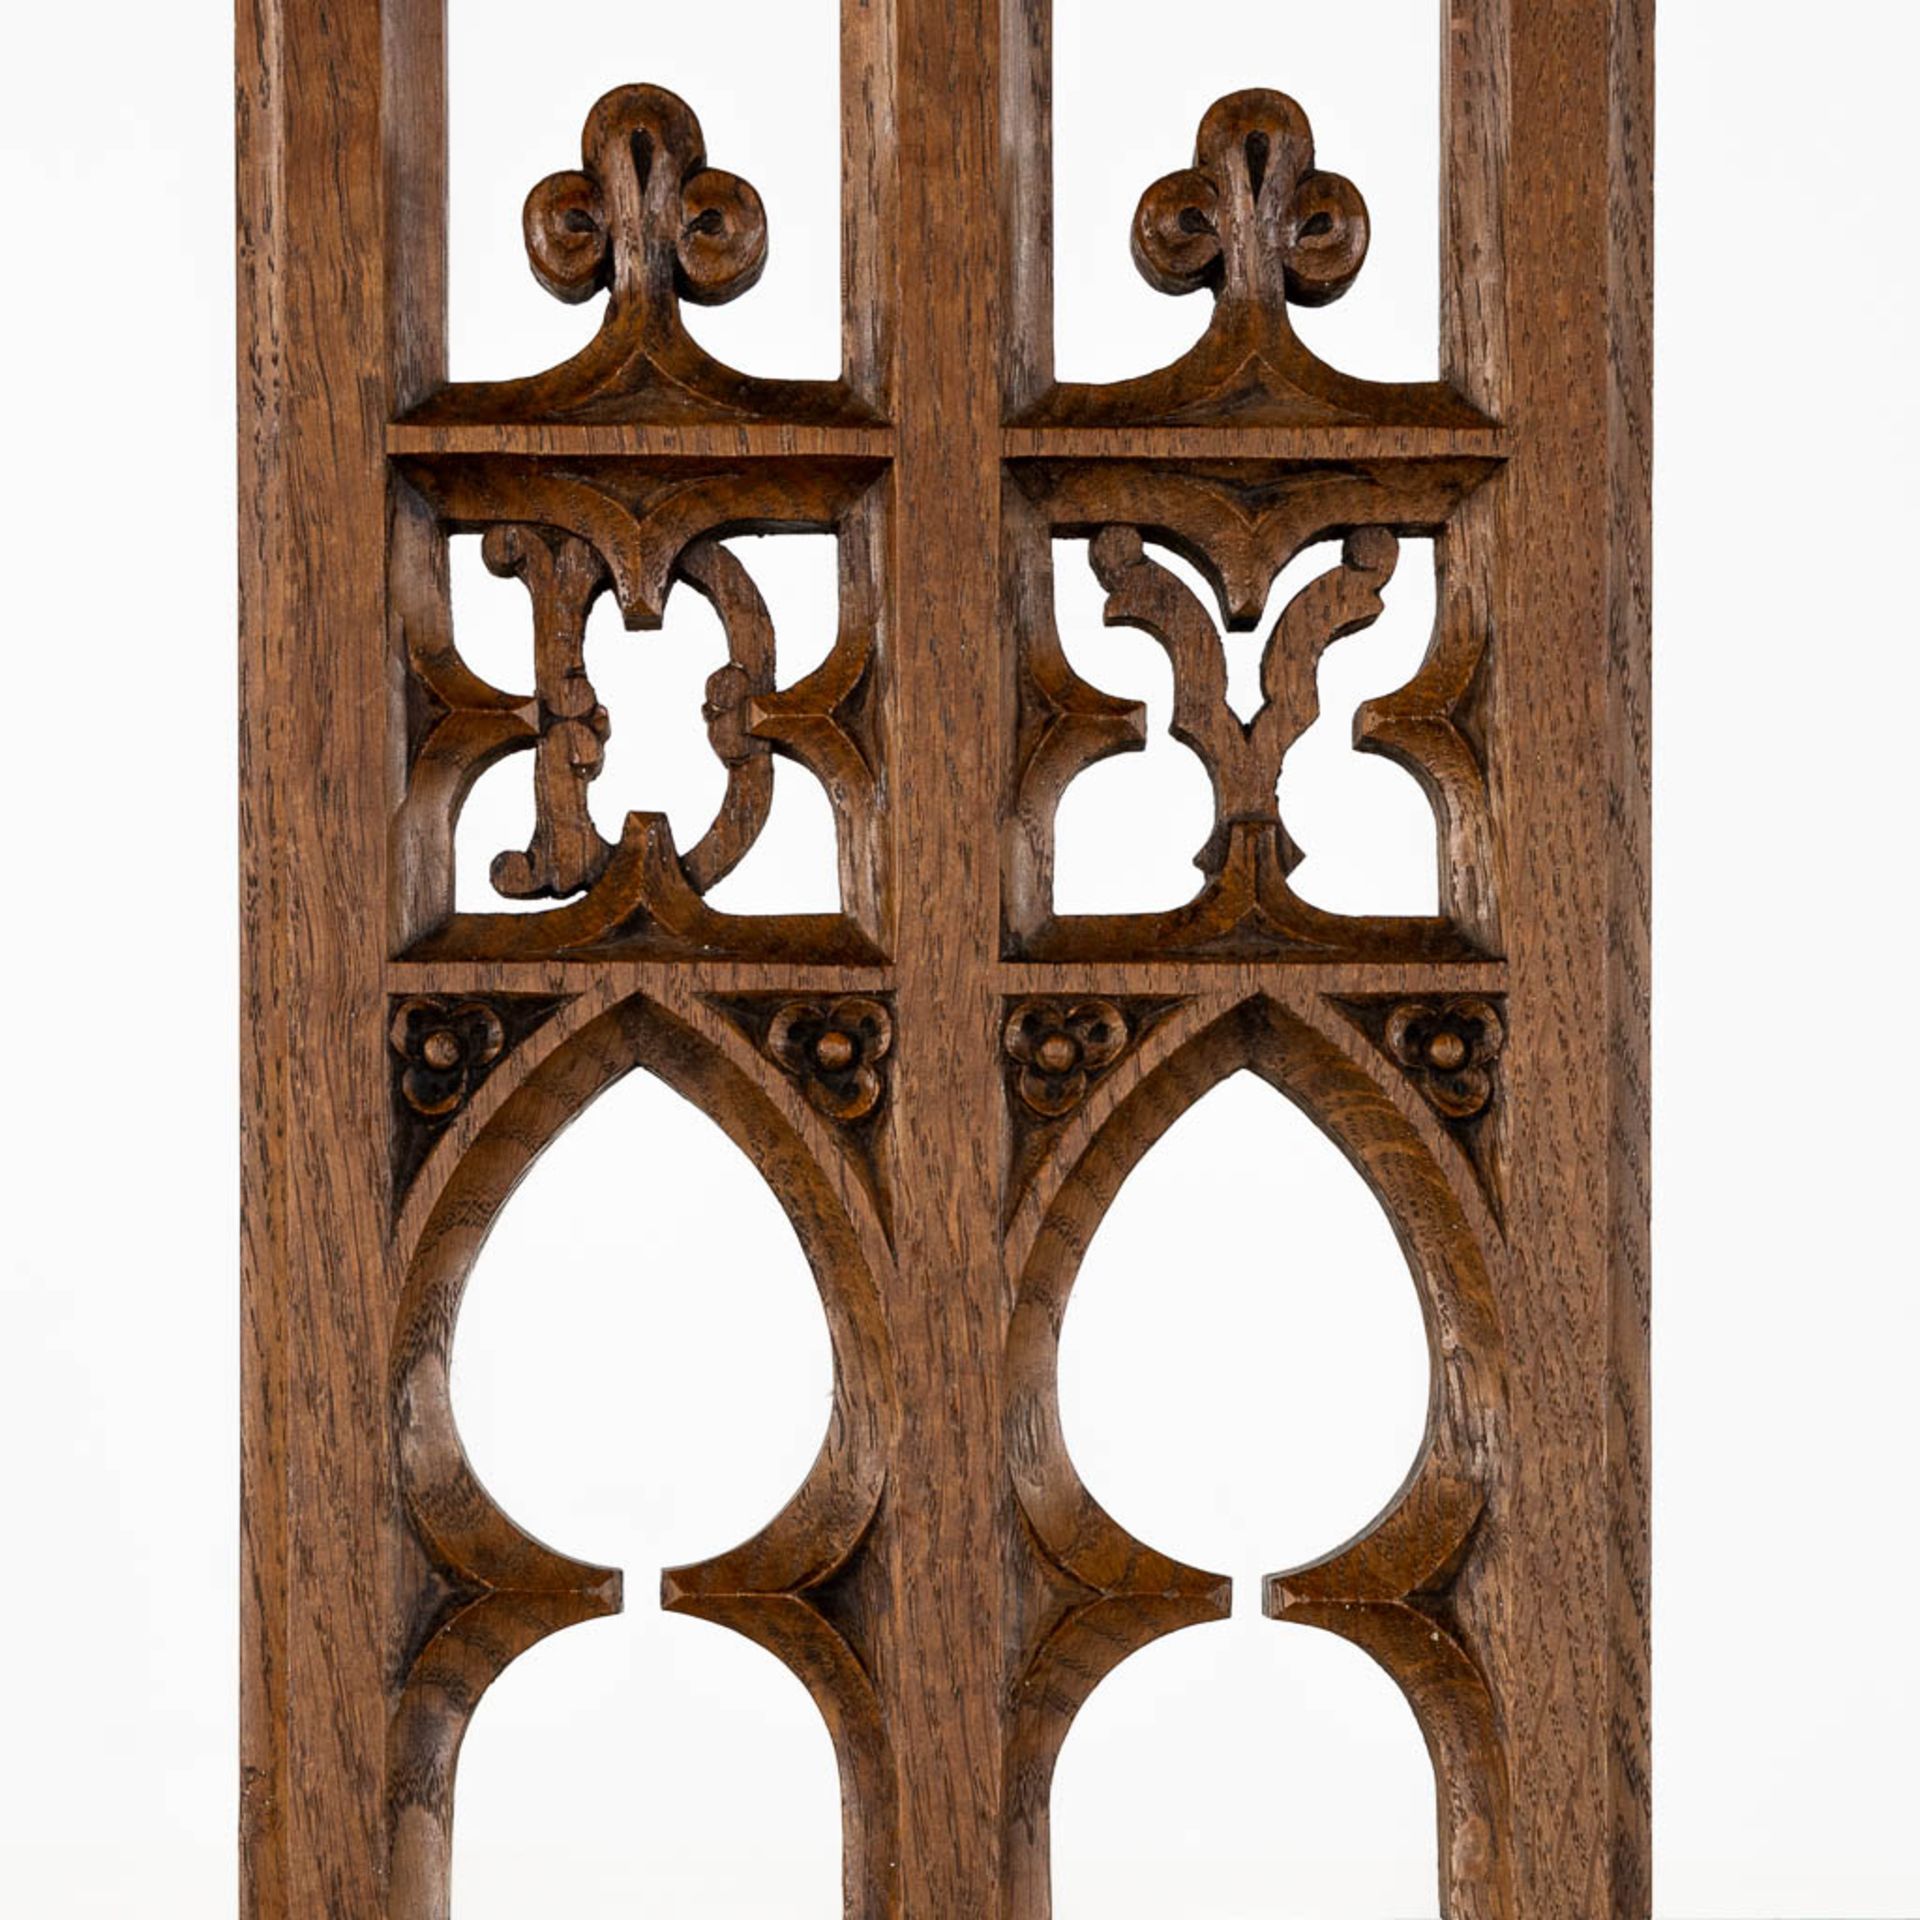 8 Gothic Revival style chairs, sculptured wood. Circa 1900. (L:54 x W:48 x H:123 cm) - Image 9 of 12